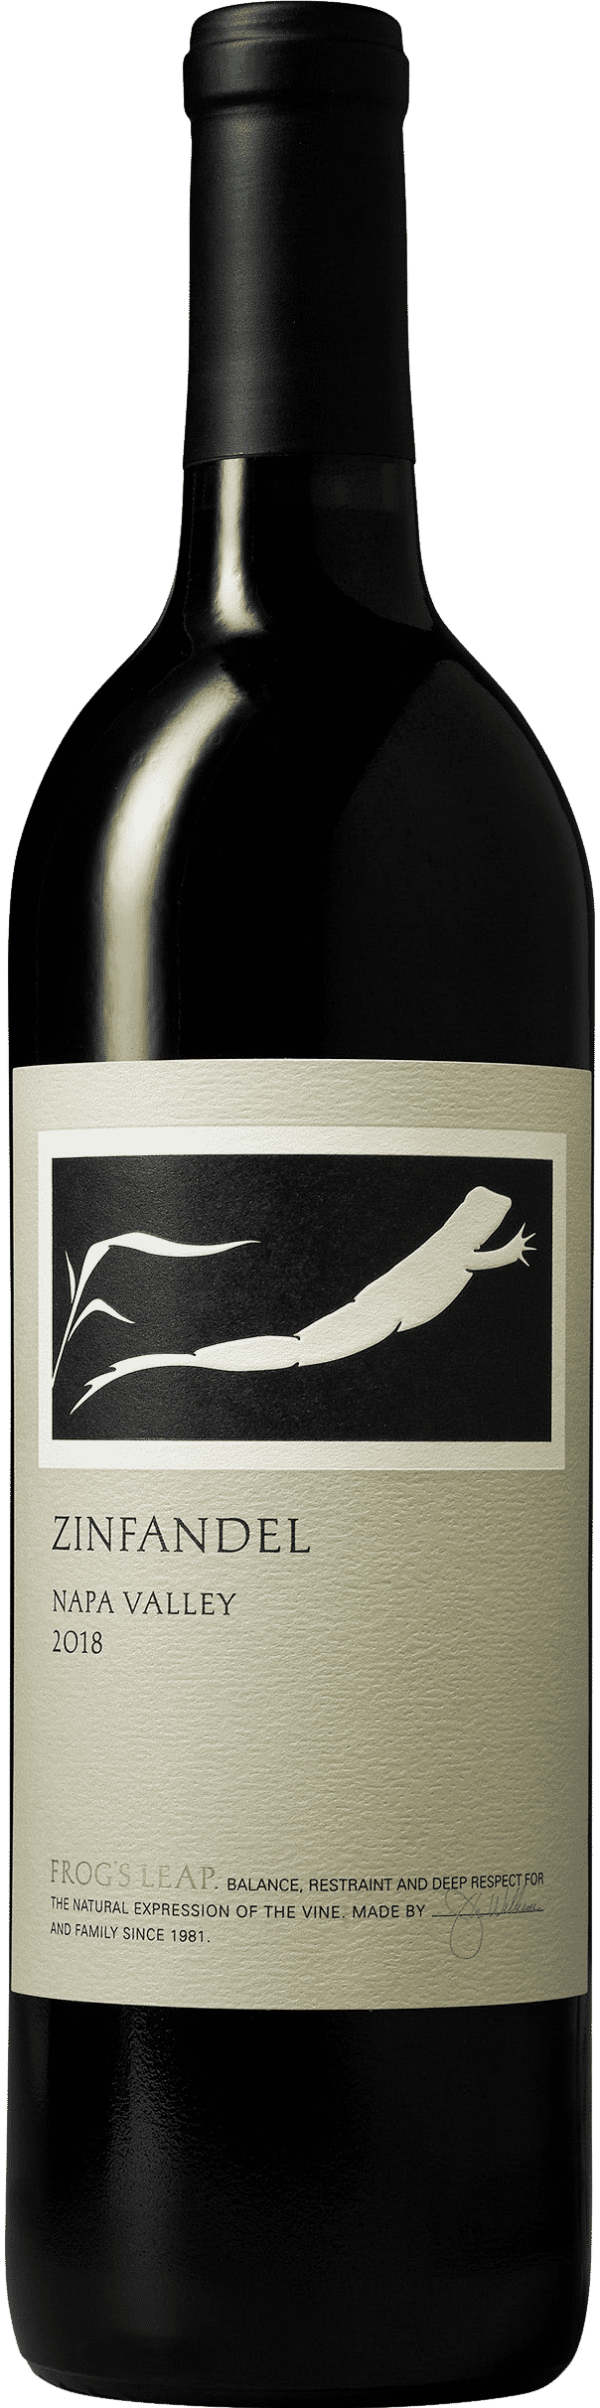 Product image of Frog's Leap Zinfandel 2018 from 8wines